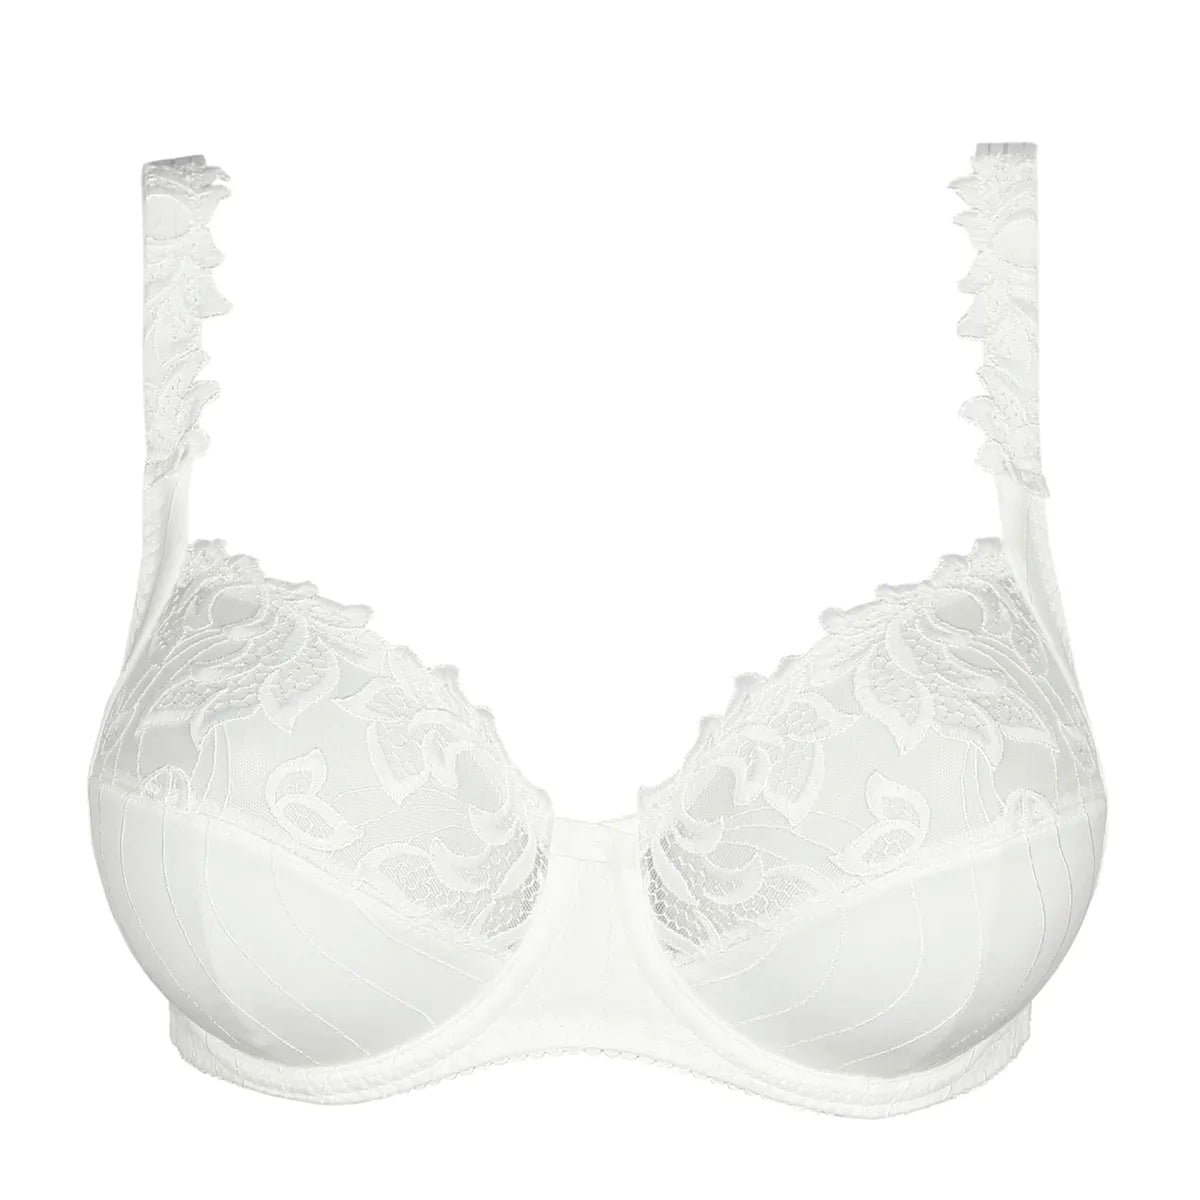 Prima Donna Deauville Full Cup Bra (Cup Sizes G,H)